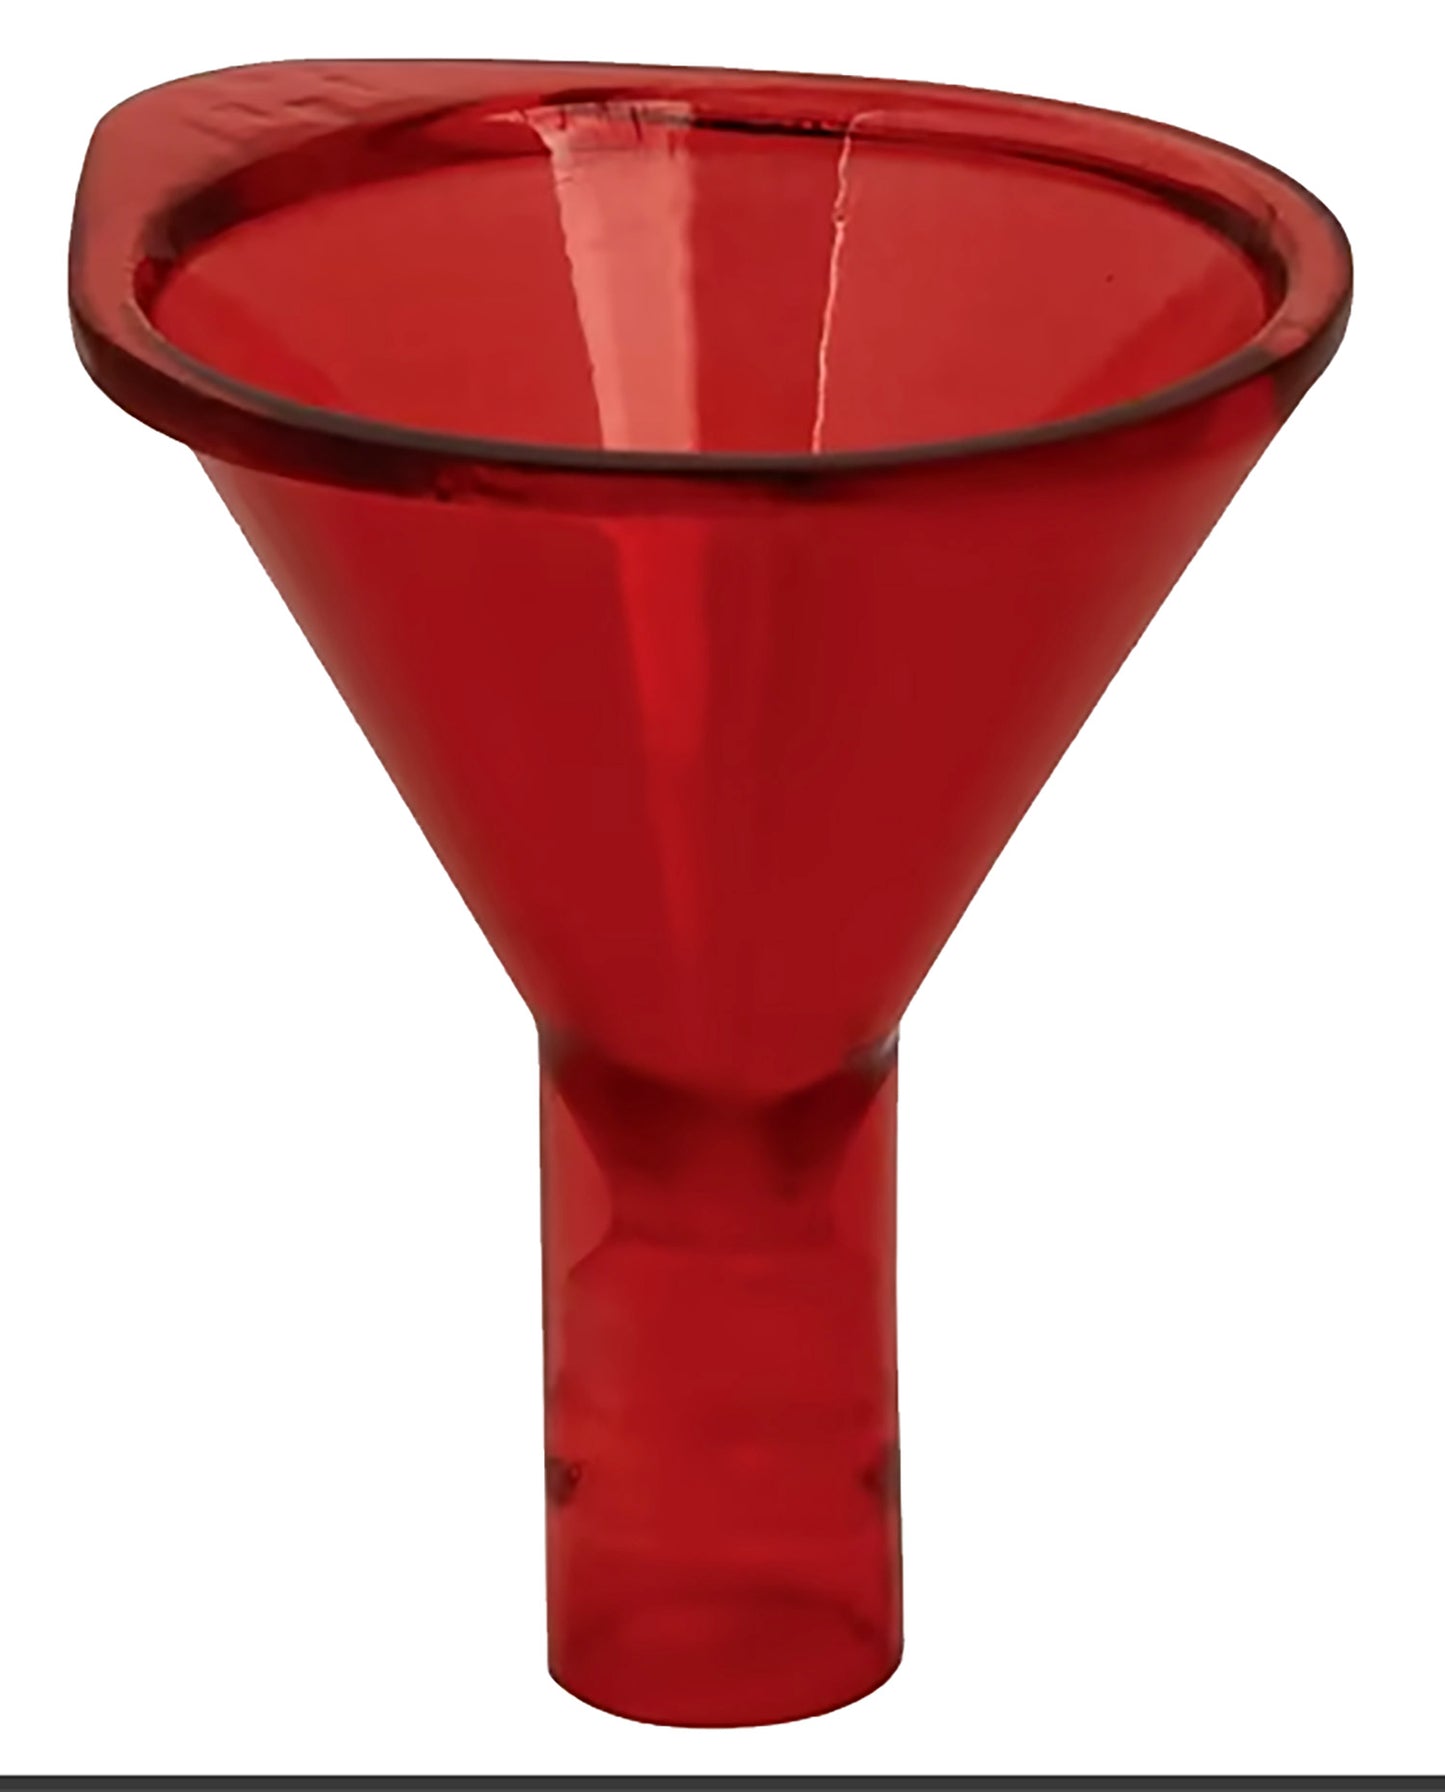 Hornady Basic Powder Funnel Red 22 to 45 Caliber Plastic